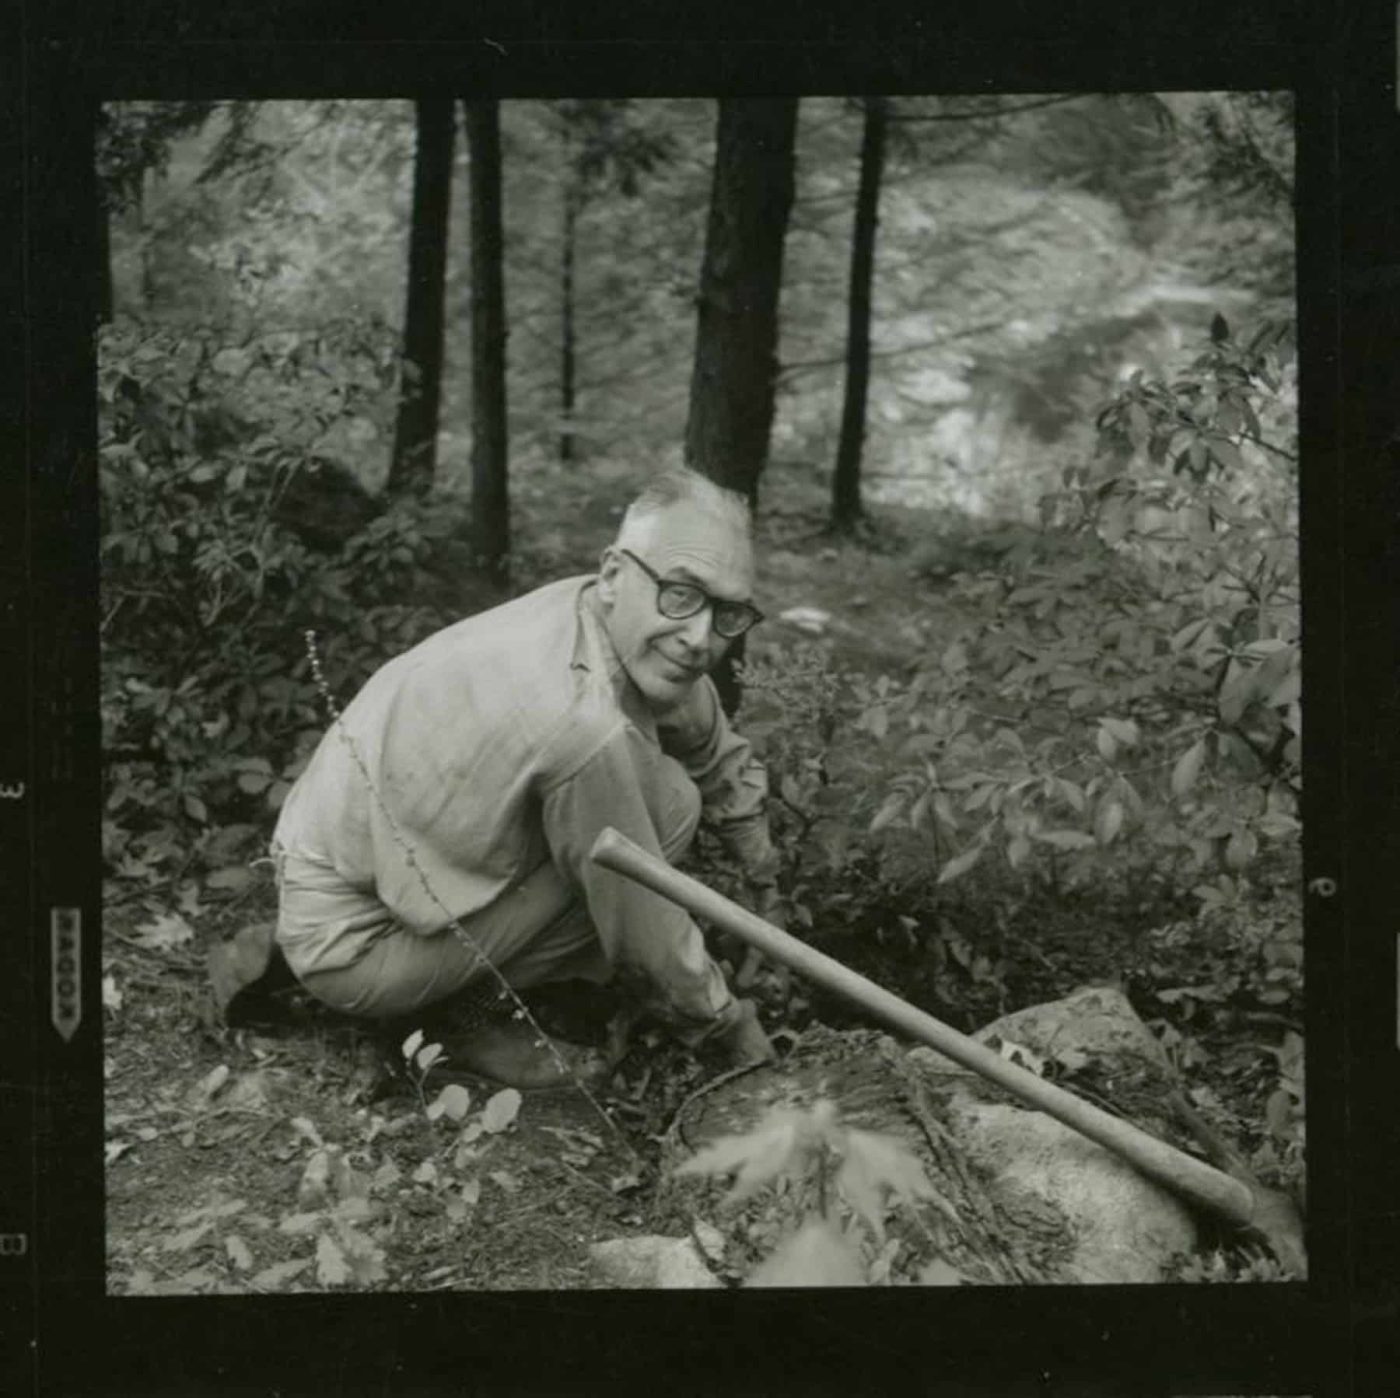 A black-and-white photo of Russel Wright at Manitoga, crouching outdoors, next to a pickax